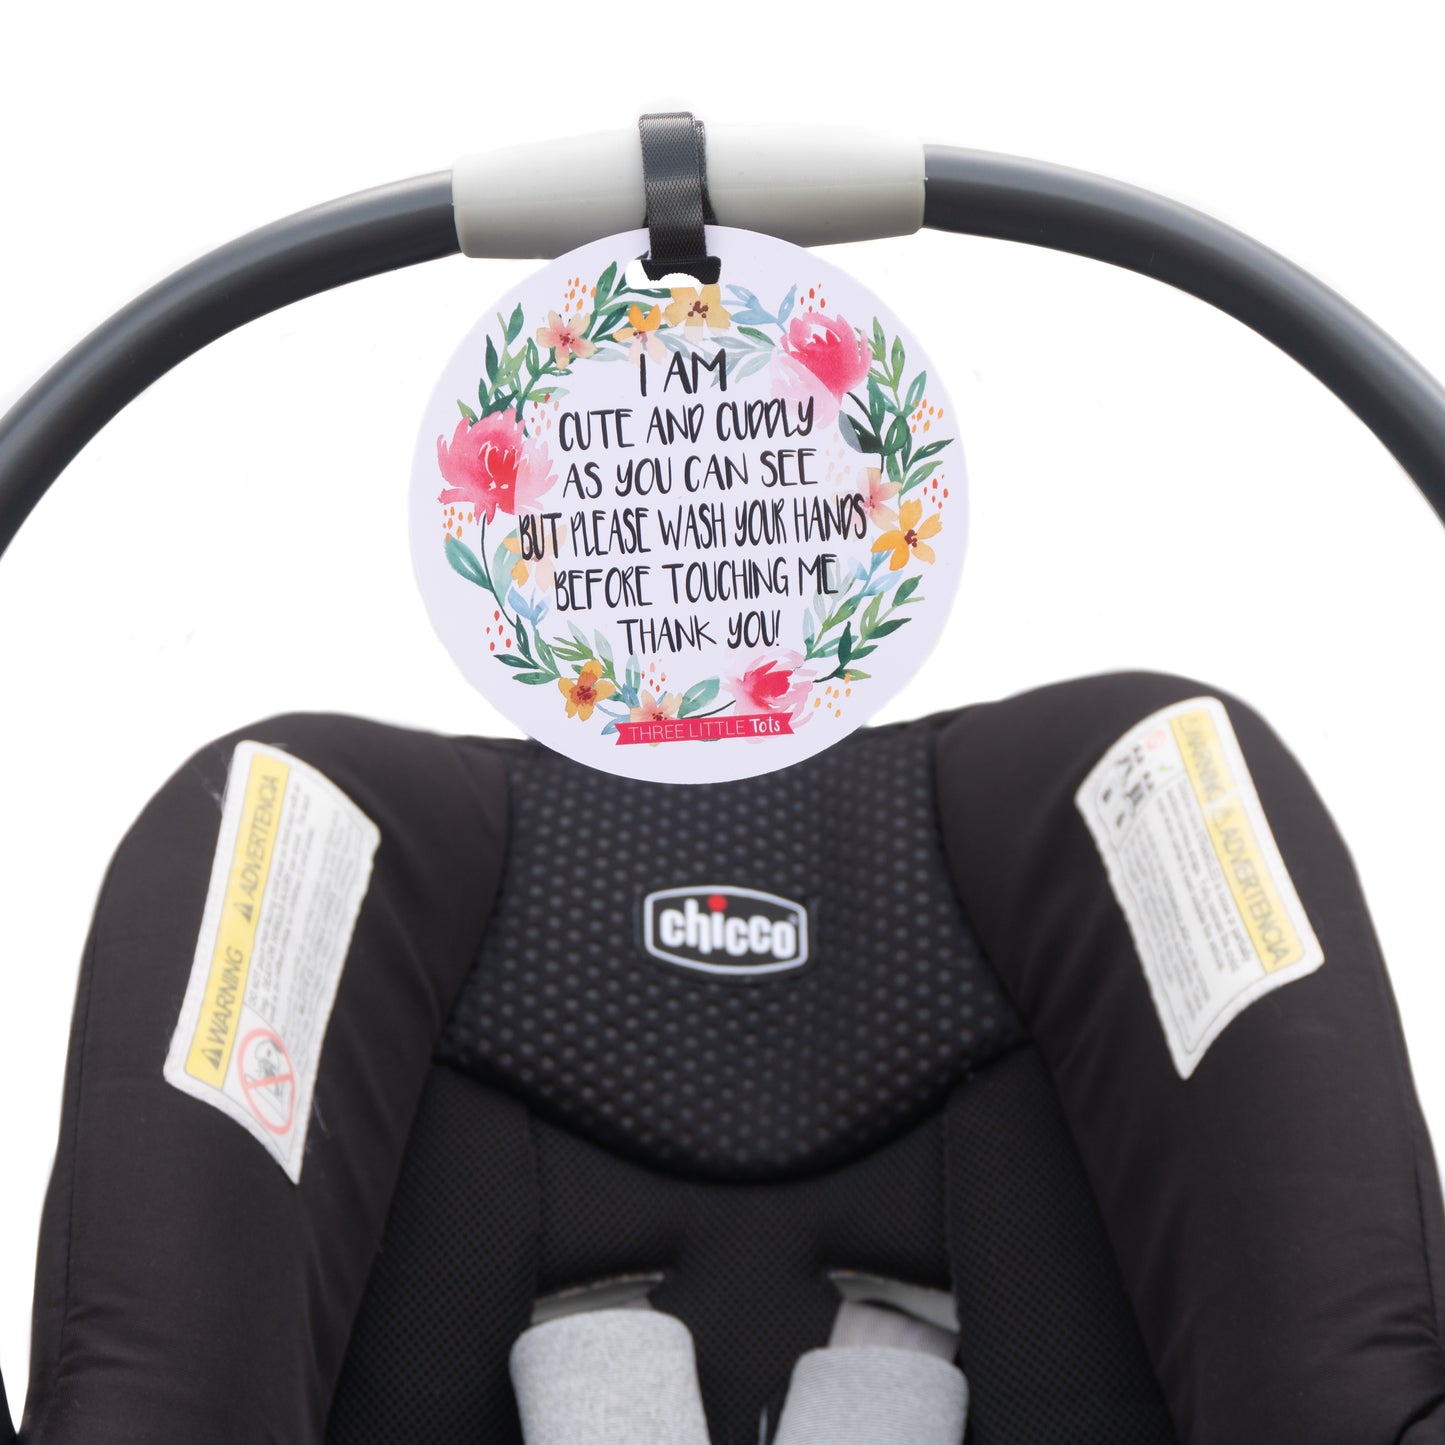 New Baby Car Seat Tag to not touch sign for stroller